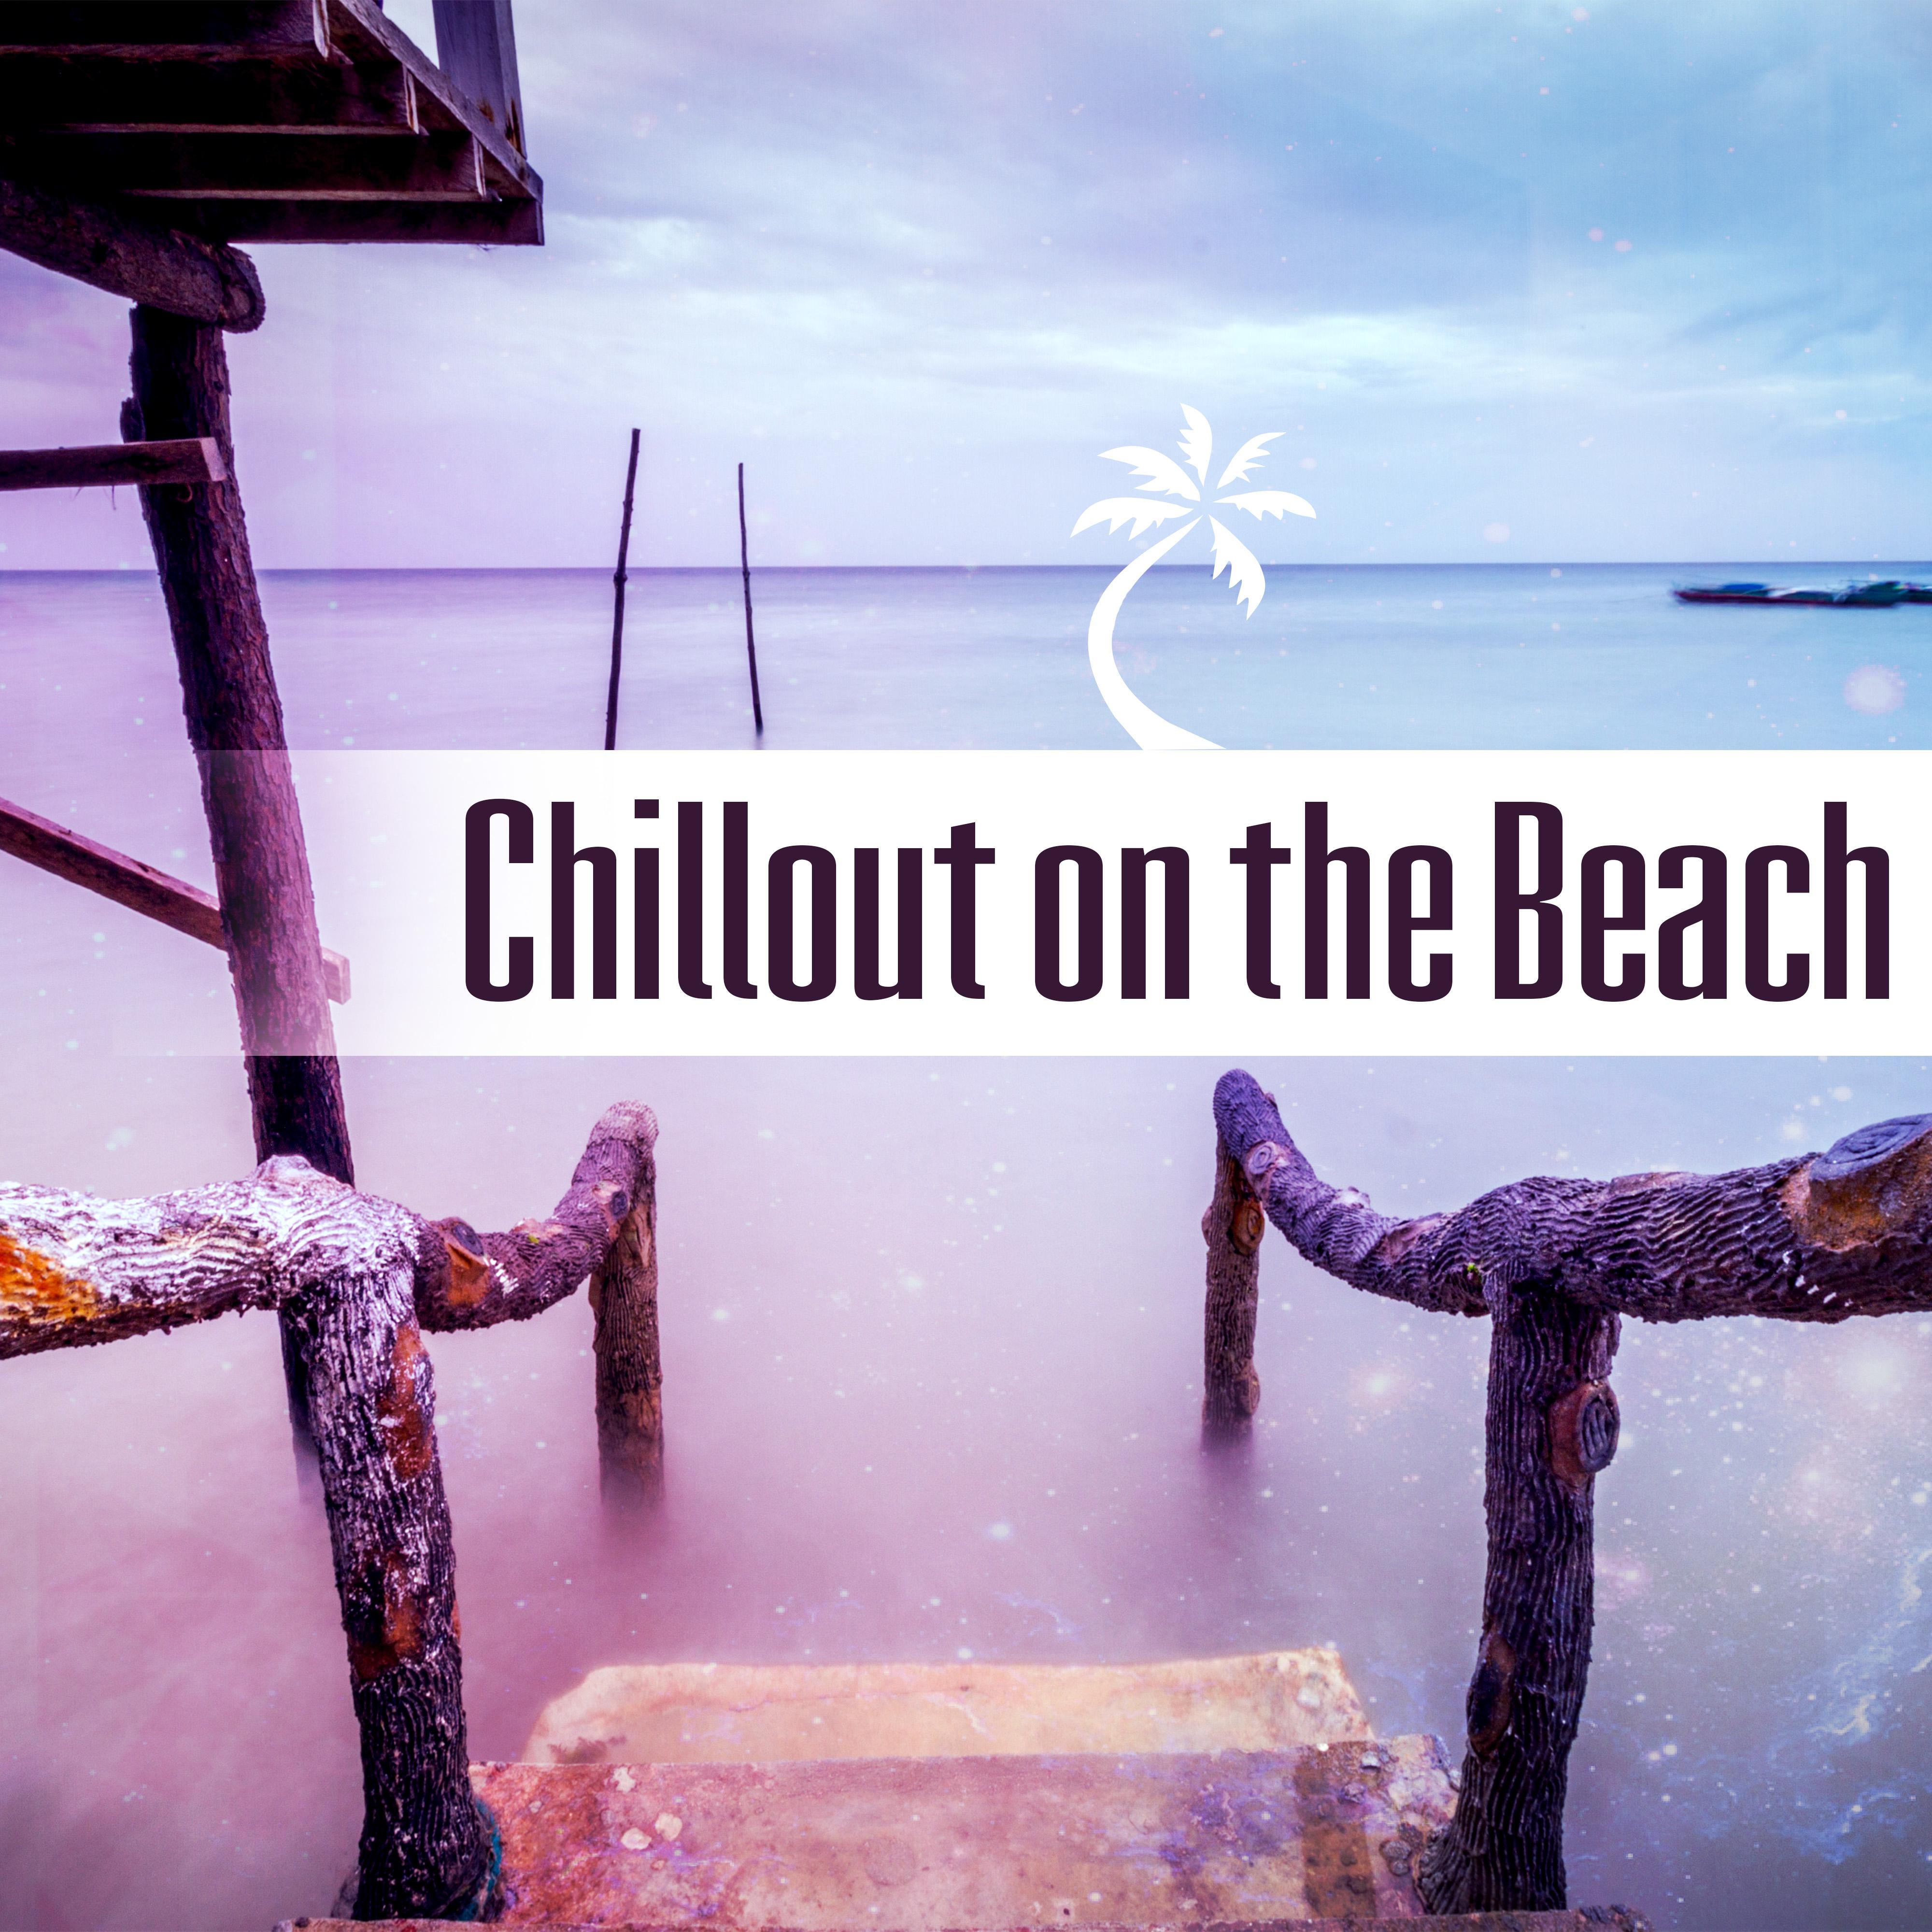 Chillout on the Beach – Calming Sounds, Chill Out Music, Summertime, Holiday Journey